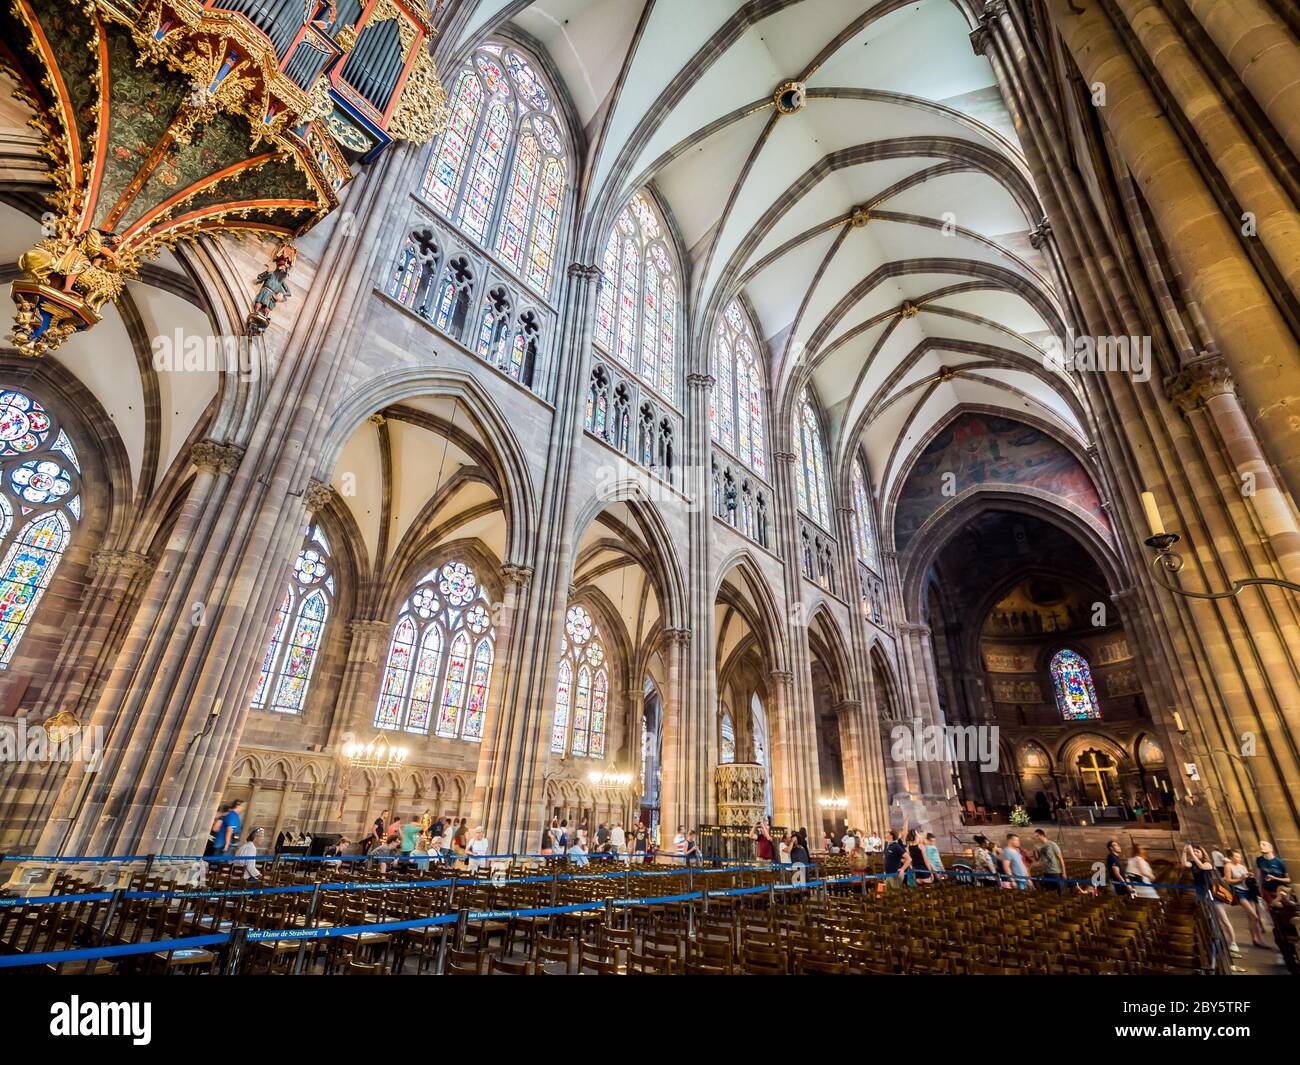 Inside the Strasbourg Cathedral or the Cathedral of Our Lady of Strasbourg, Alsace, France Stock Photo